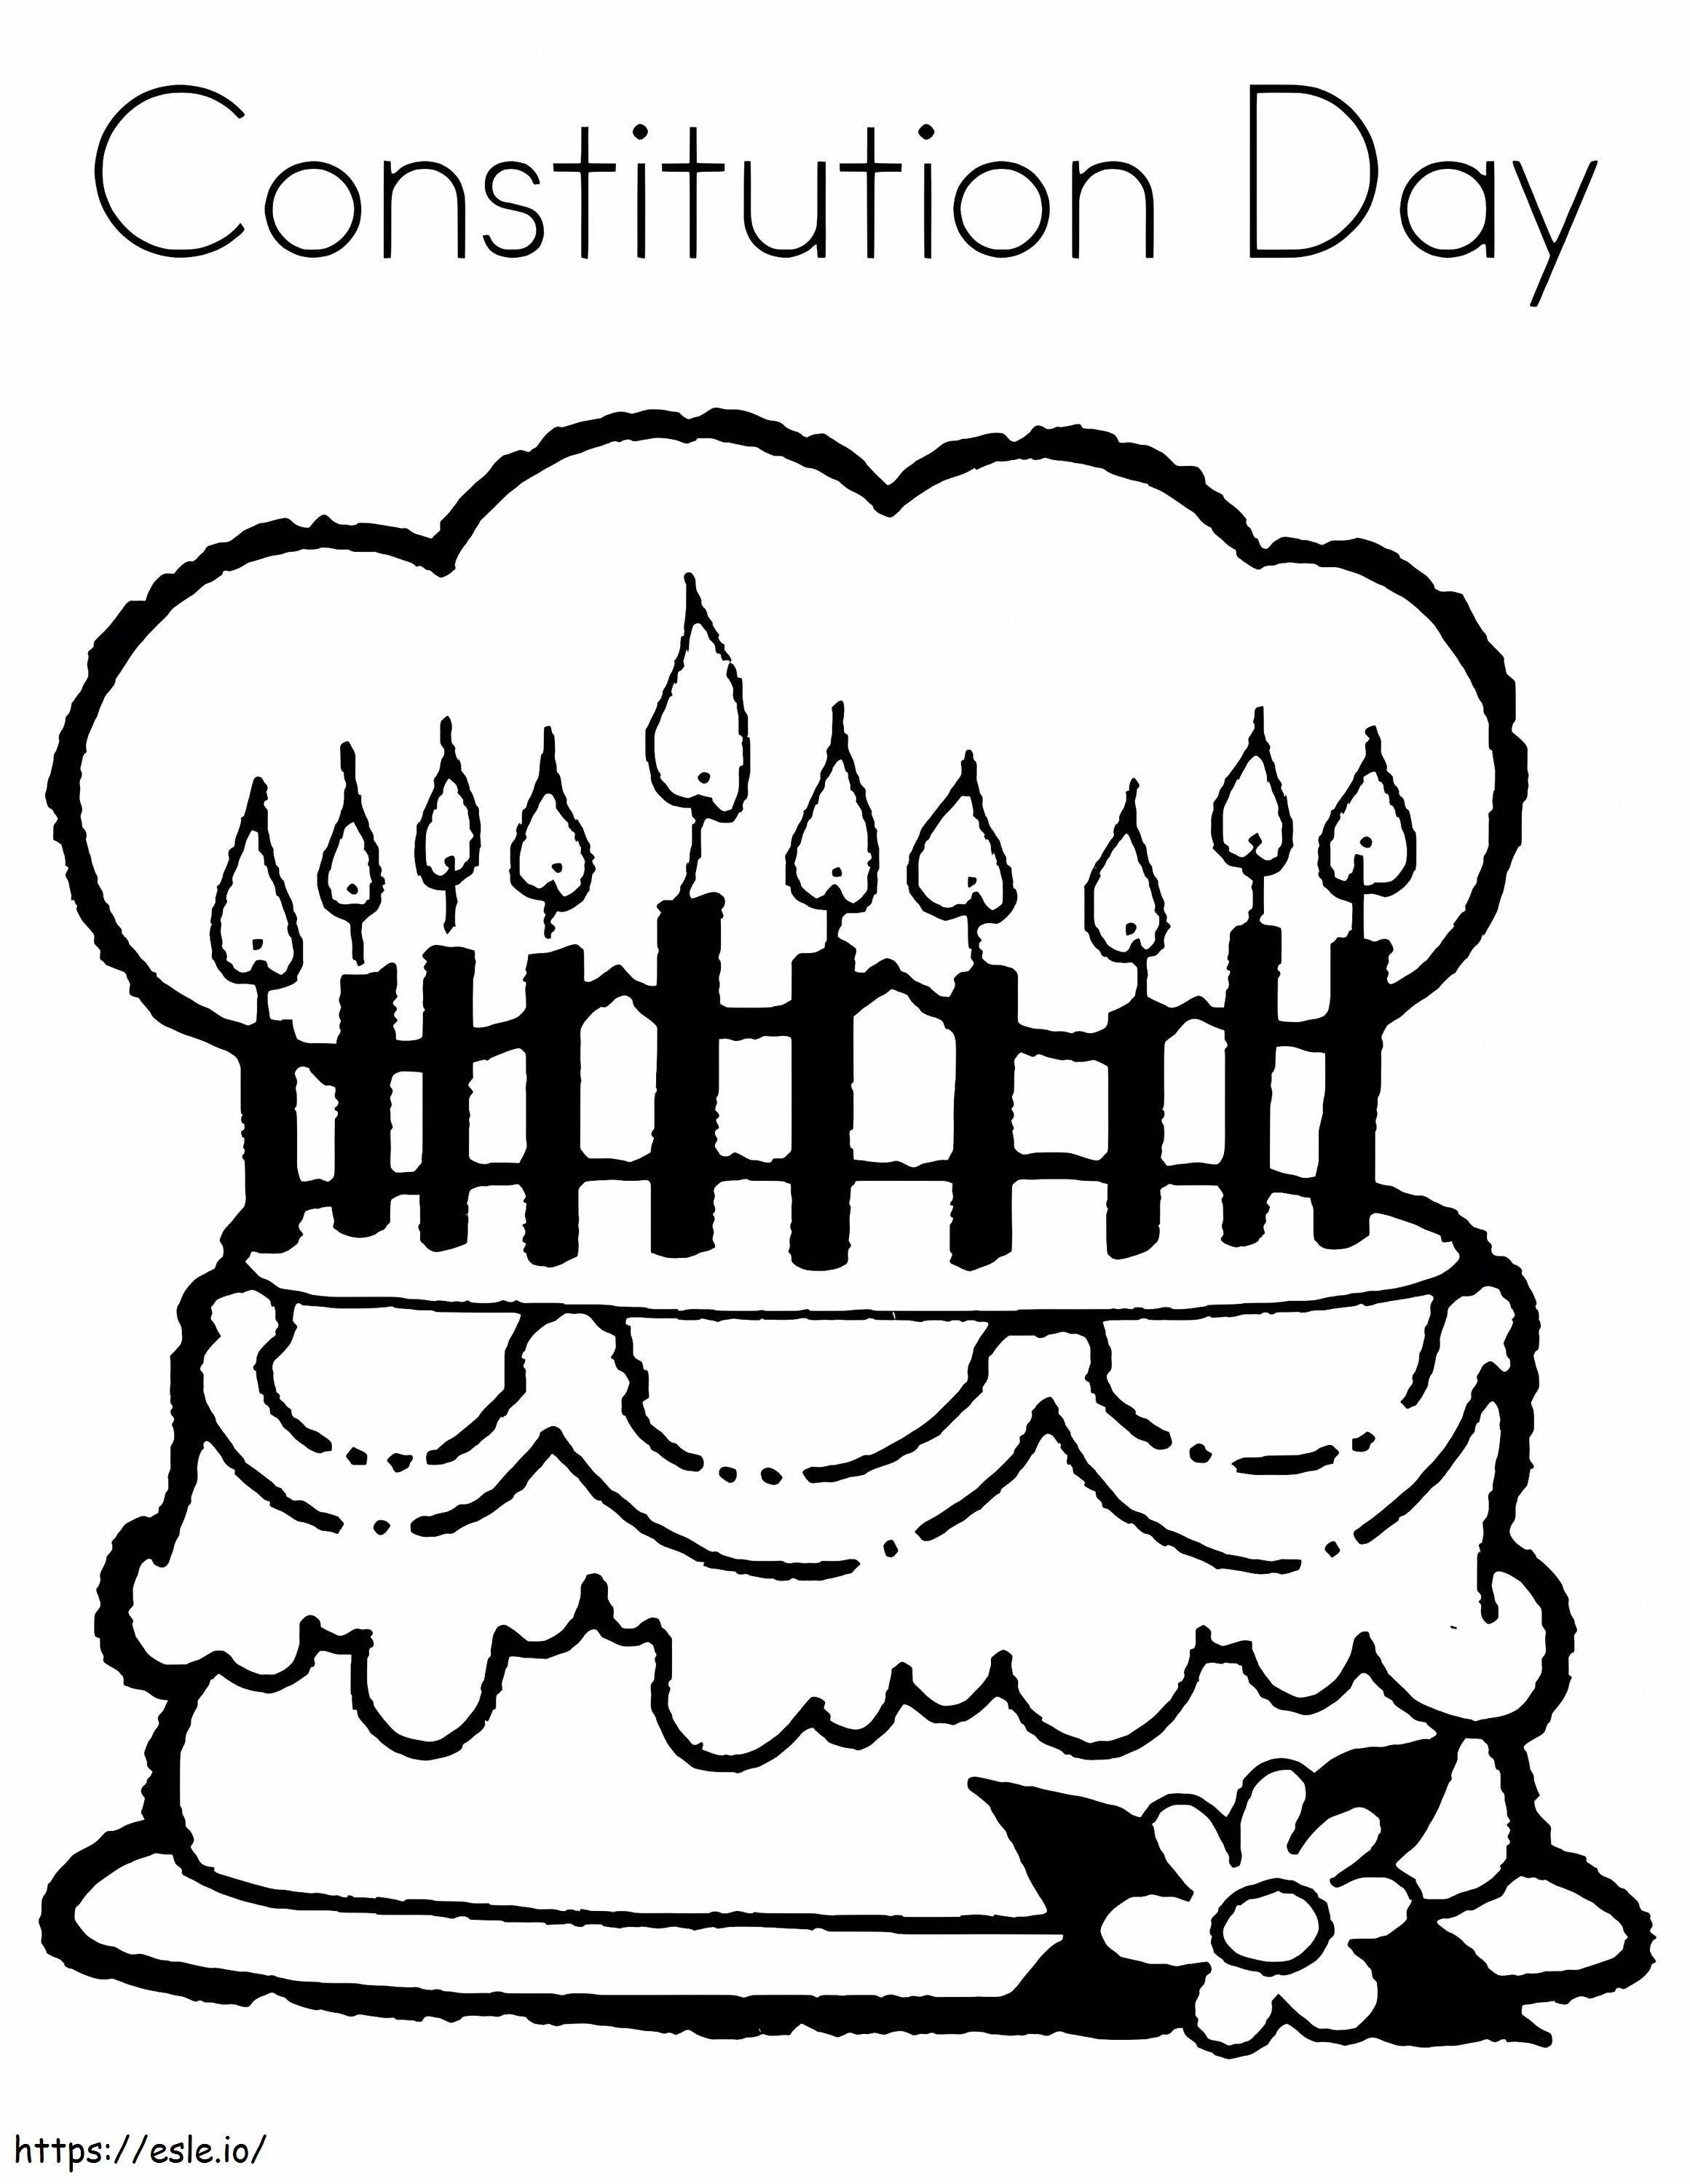 Constitution Day 4 coloring page